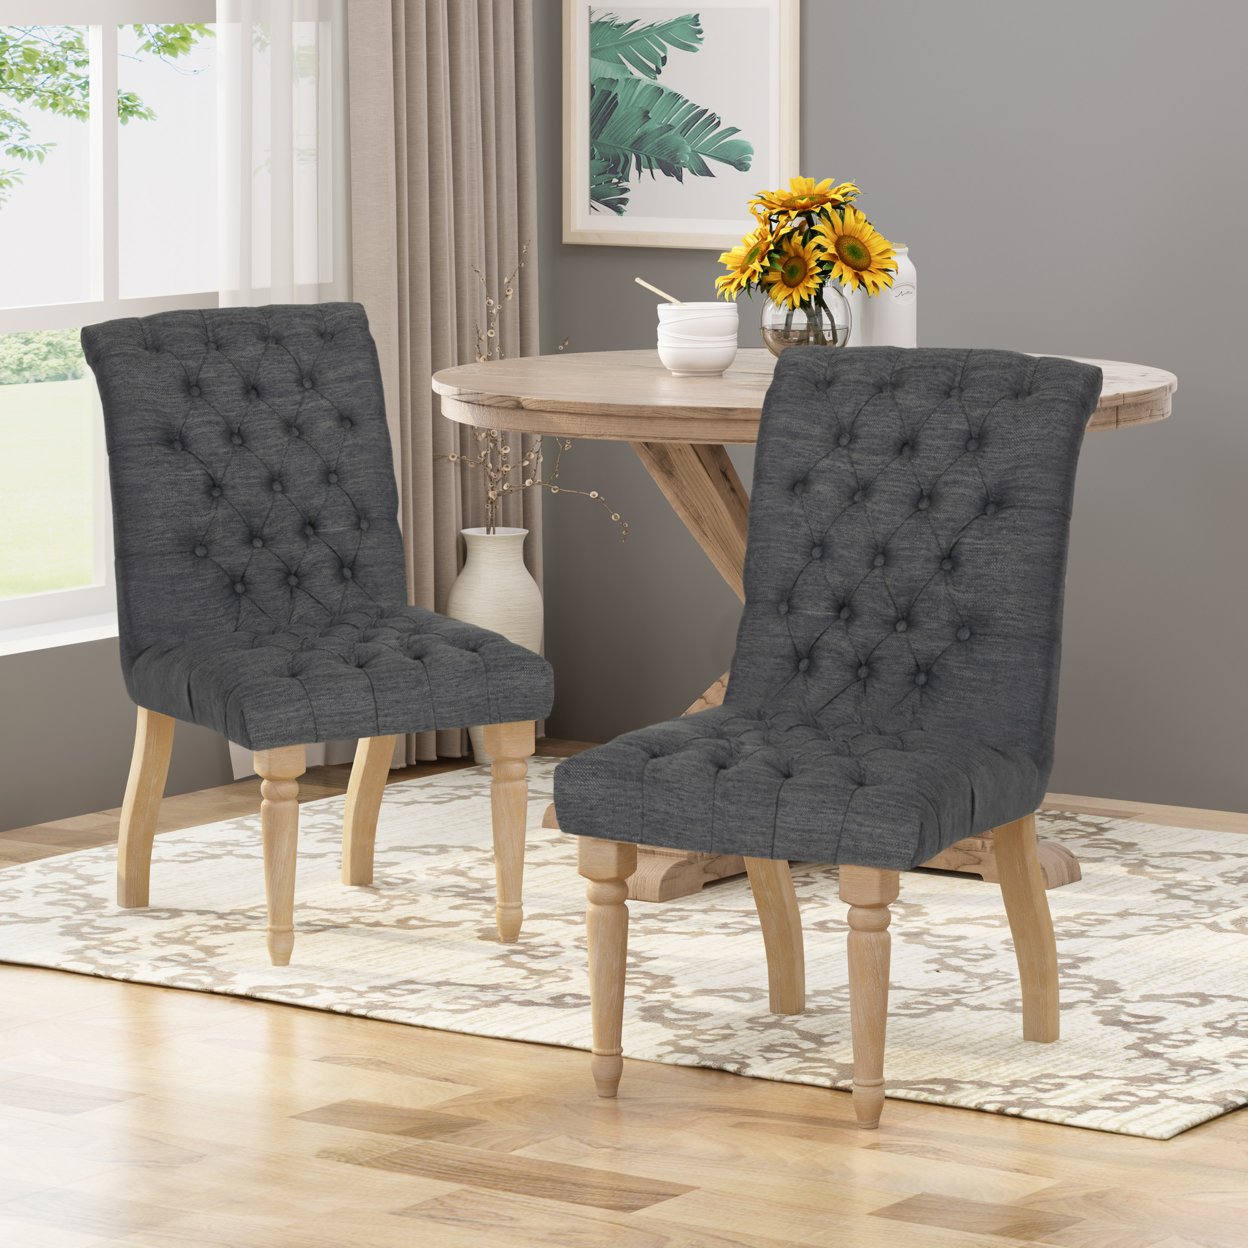 Terrance Tufted Fabric Dining Chair (Set Of 2) - Light Blush + Natural